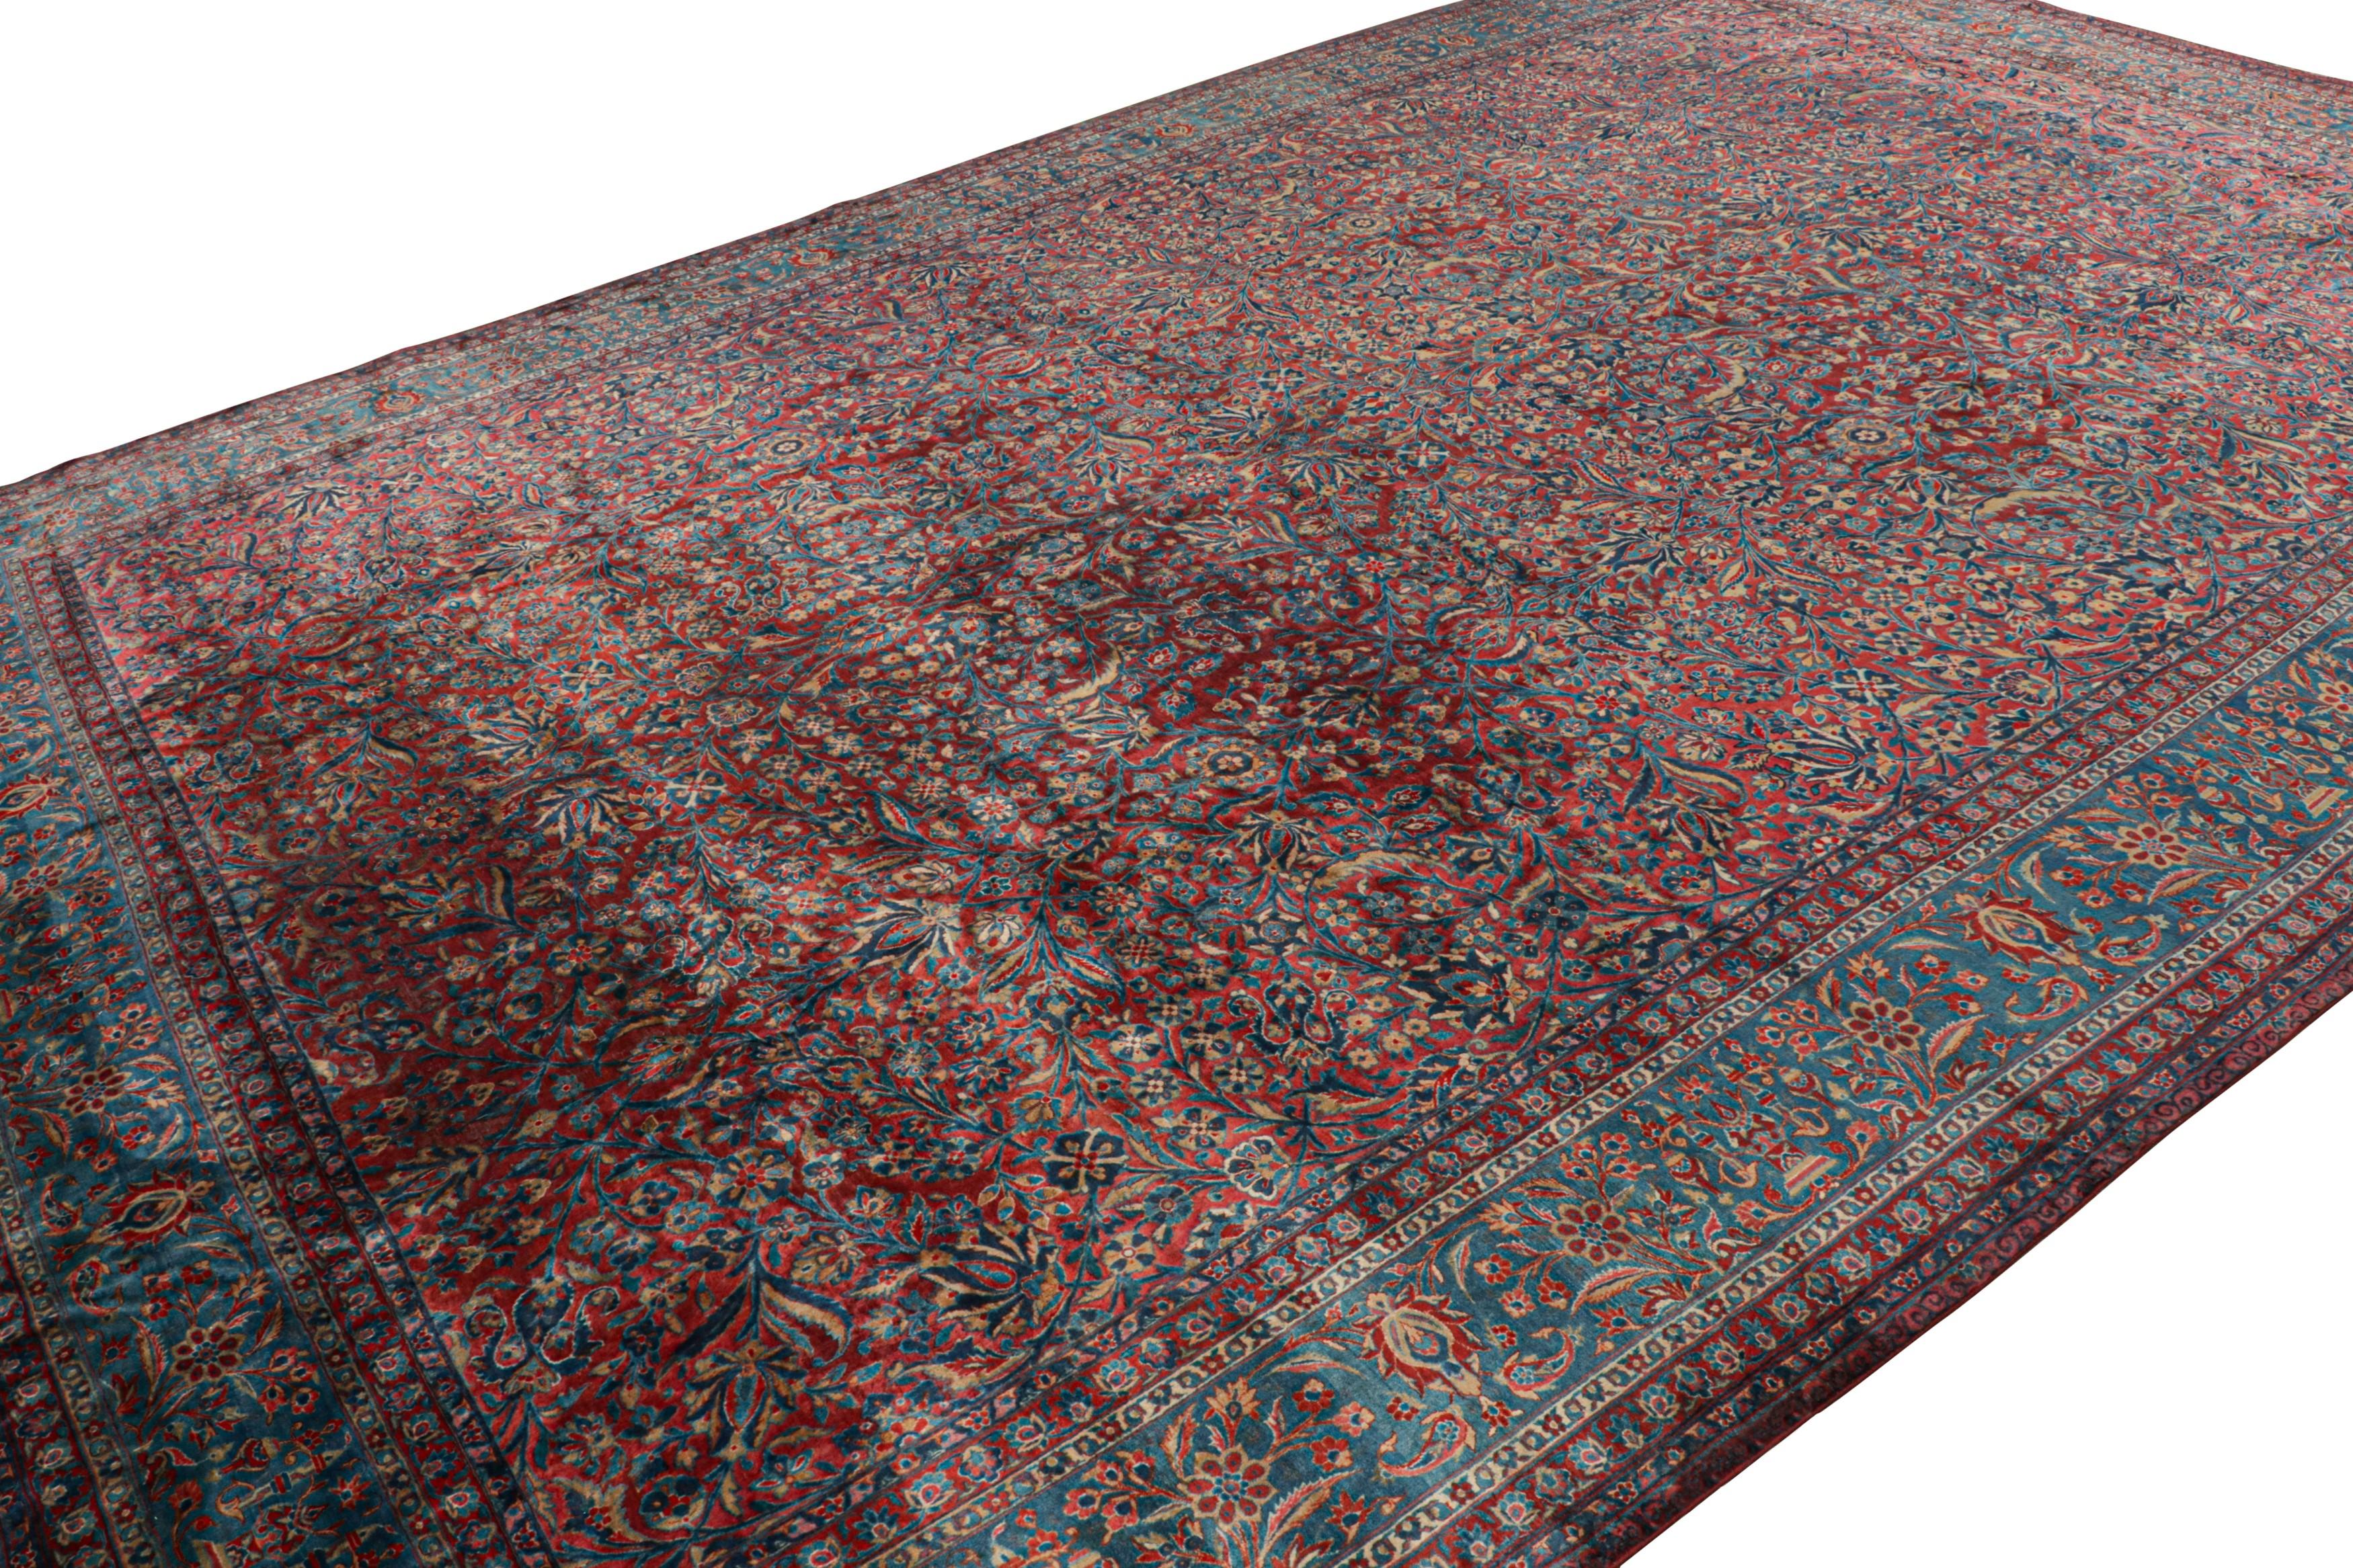 Hand-knotted with Manchester wool, an antique 12x17 Persian Kashan rug circa 1920-1930 - curated by Rug & Kilim.

On the Design:

Particularly a rare oversized rug, this piece is one of the few Kashani rugs of its size one might find today in such